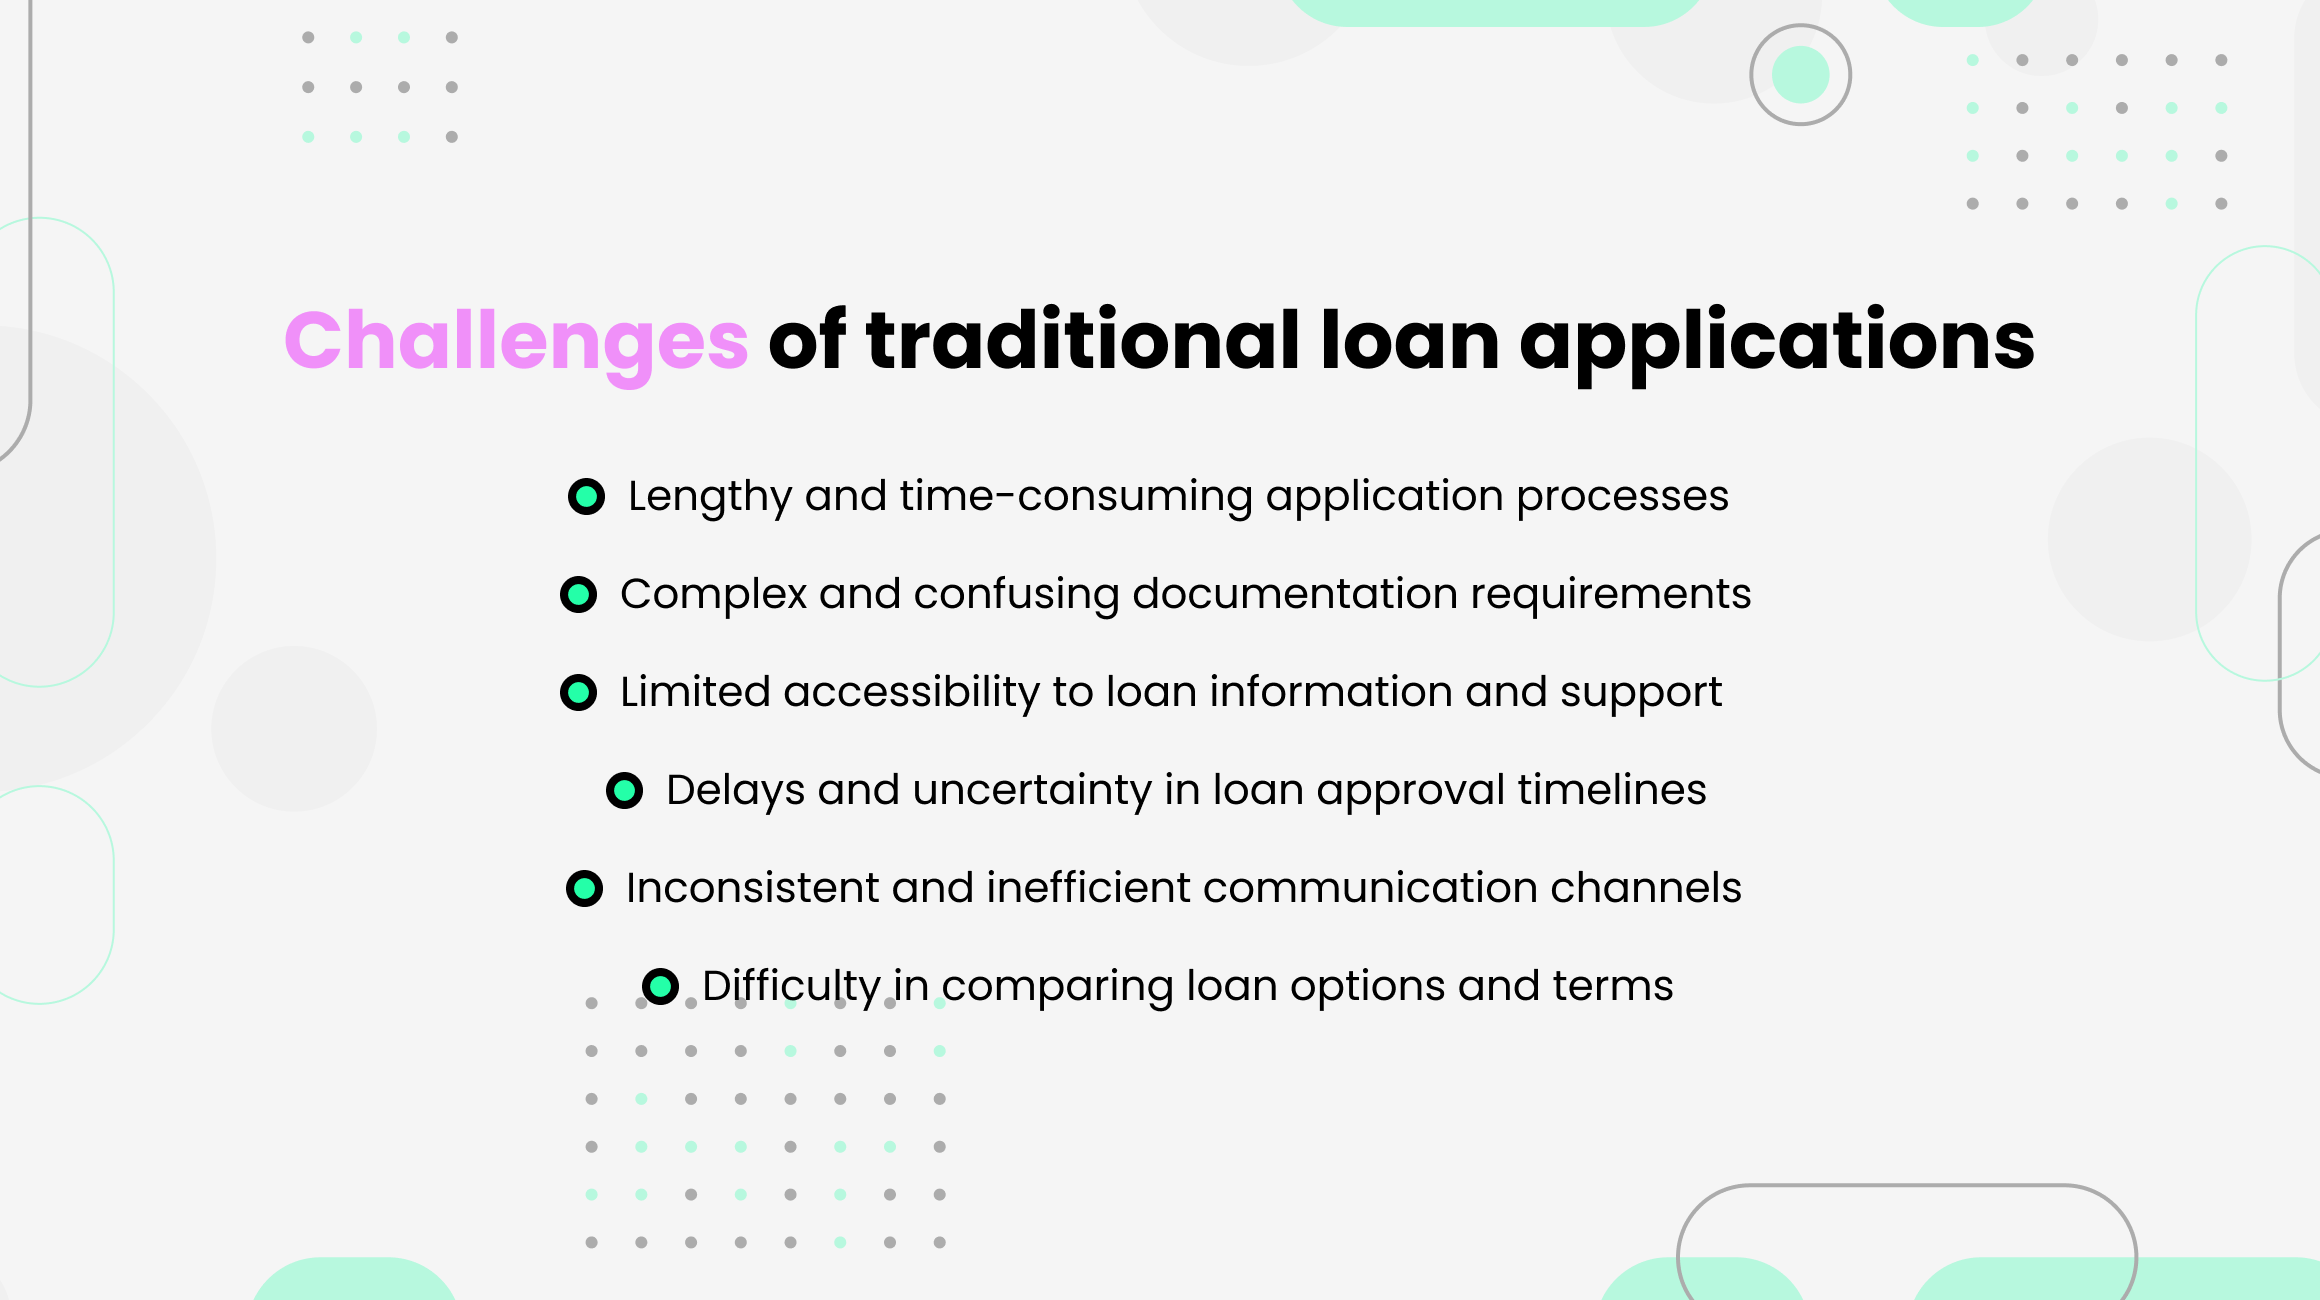 Challenges of Traditional Loan Applications